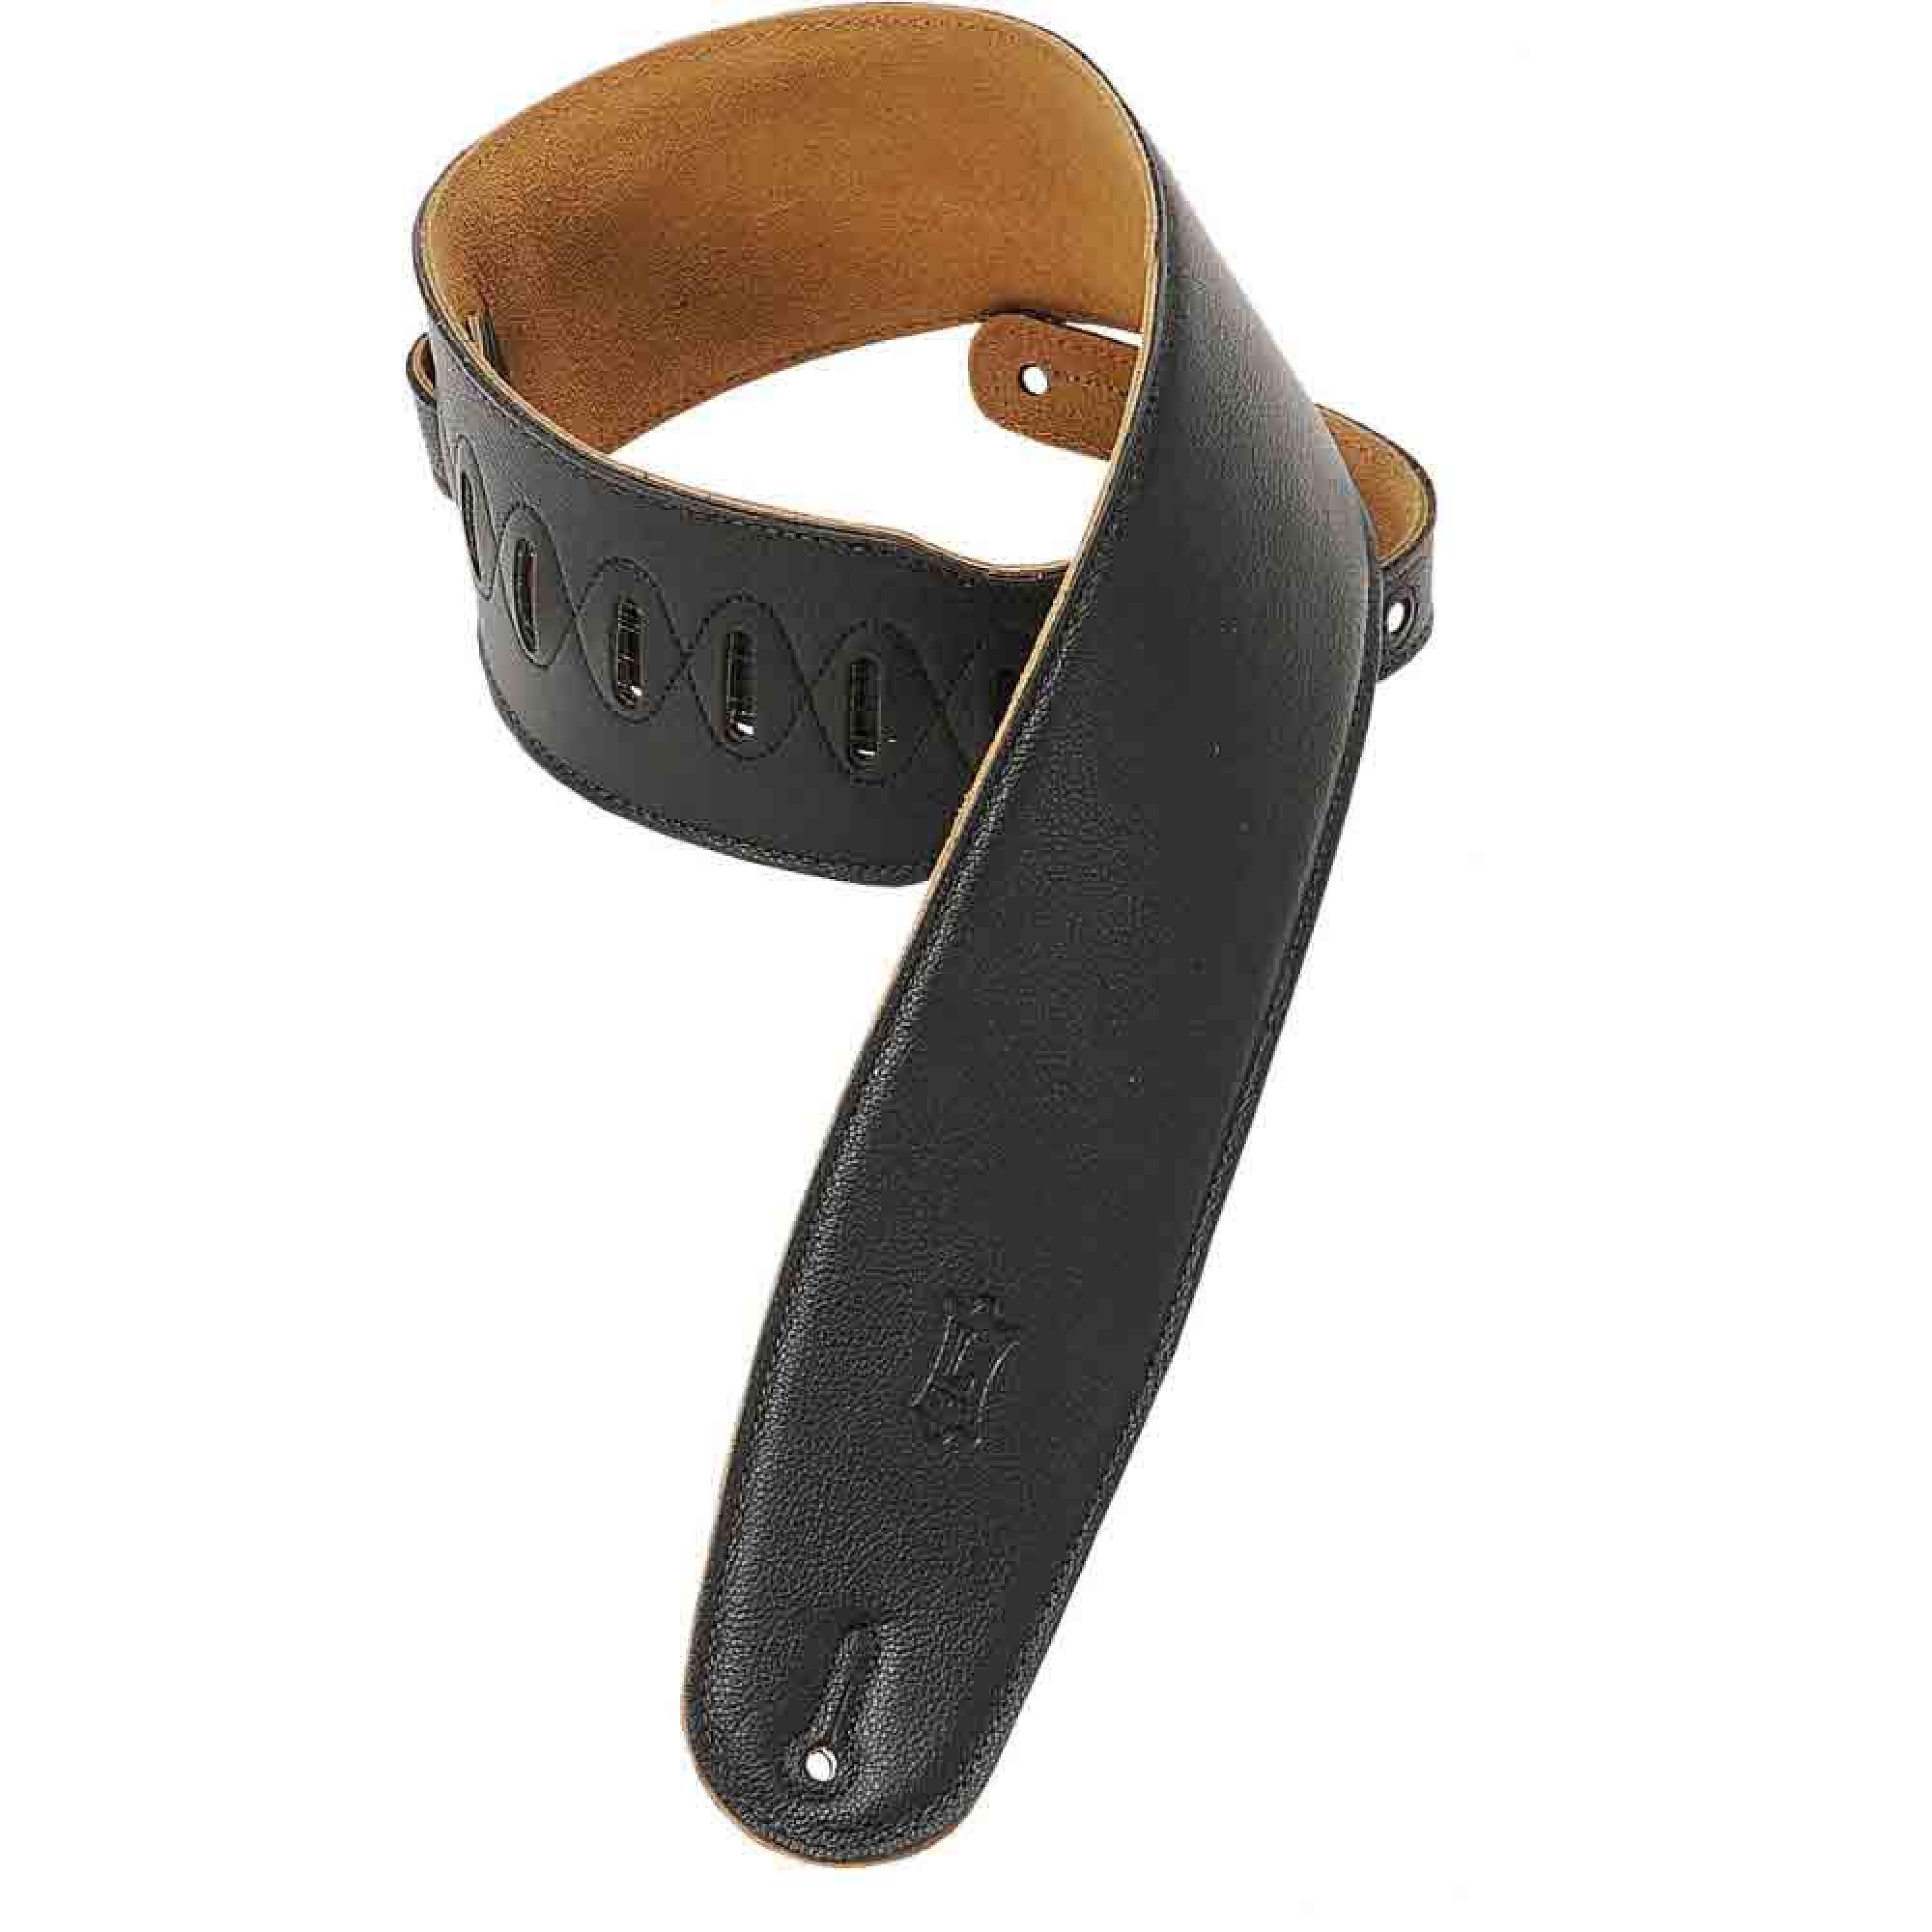 Levy's M4GF 3.5-inch Padded Garment Leather Bass Strap - Black